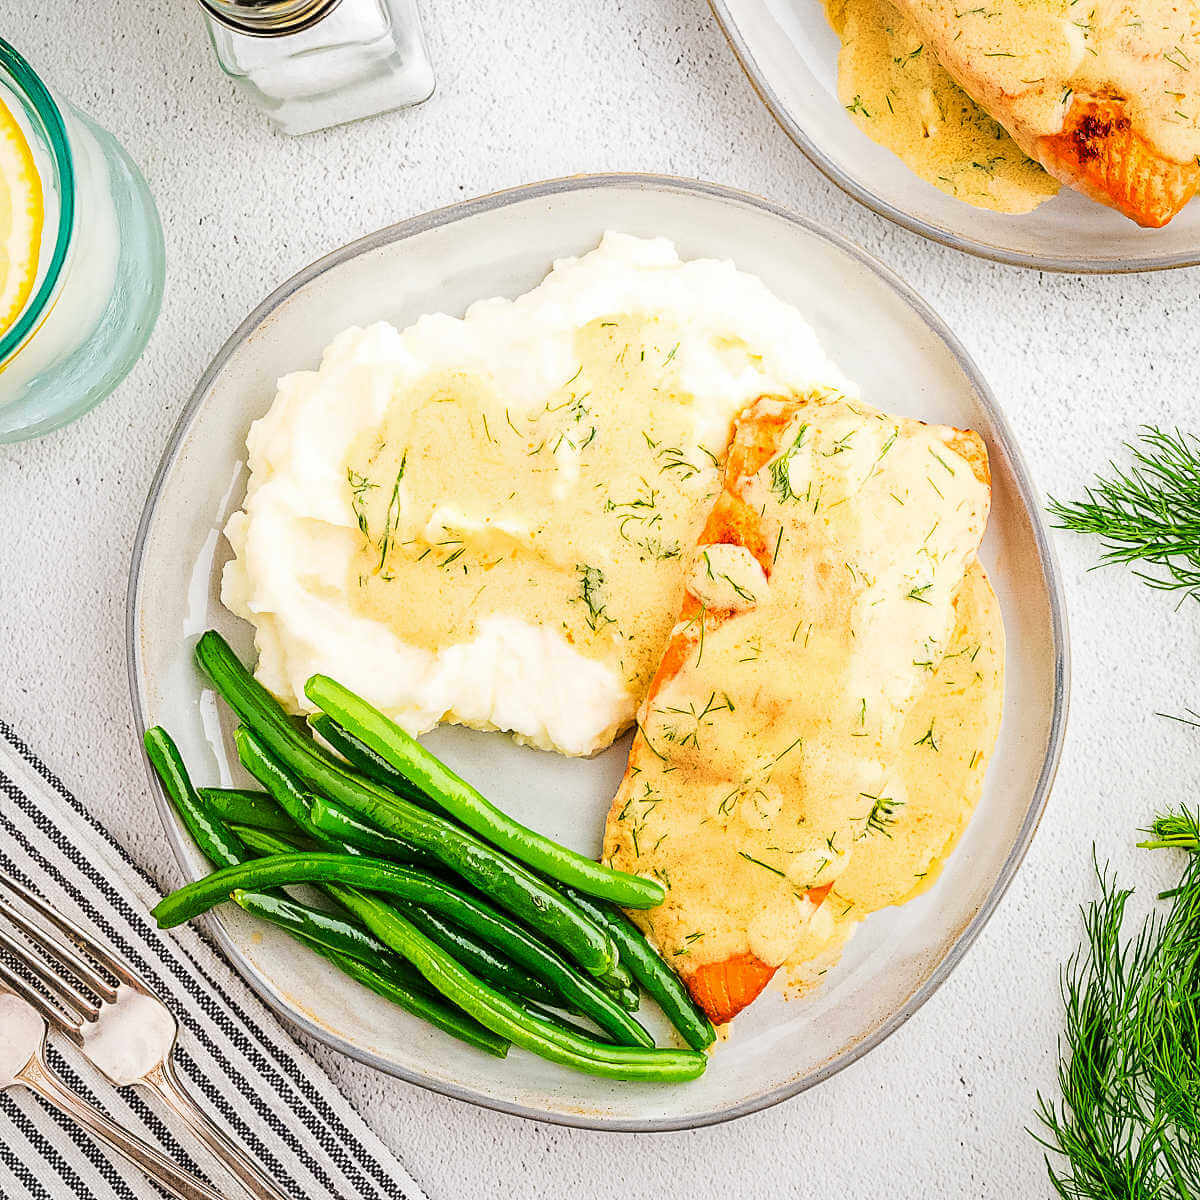 Salmon with dill sauce on a serving plate.